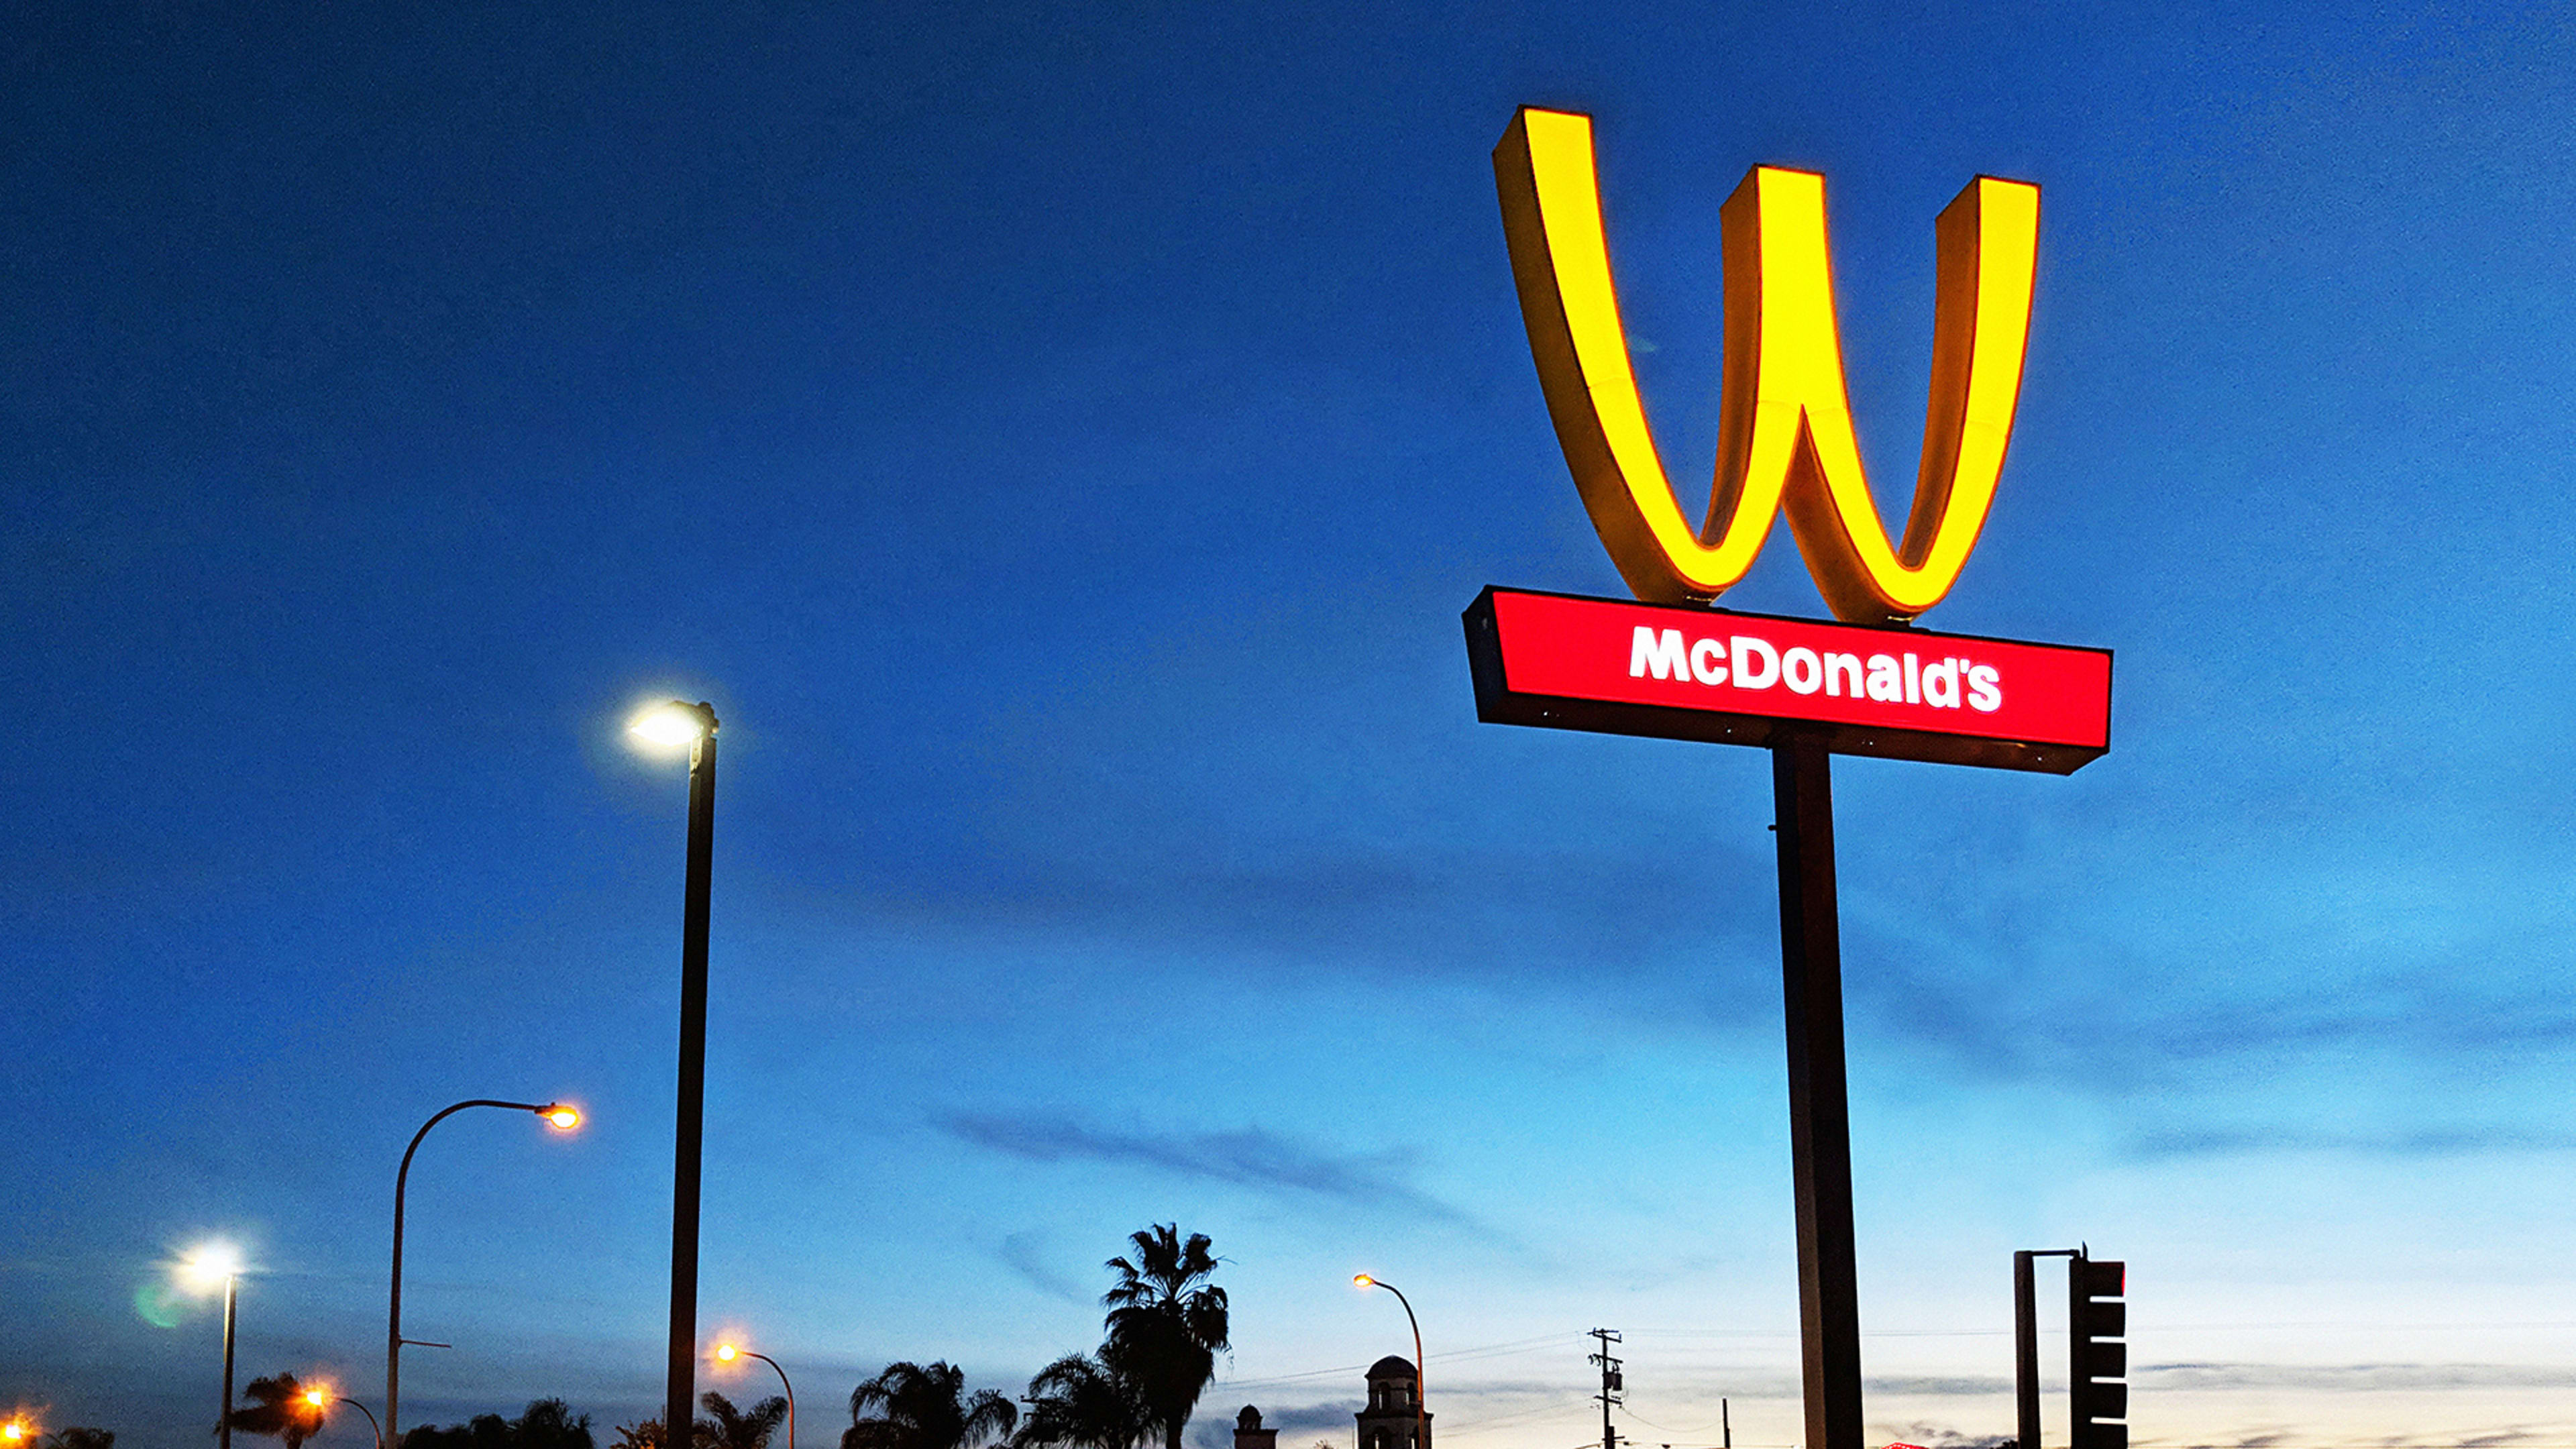 McDonald’s Is Flipping The Golden Arches For International Women’s Day